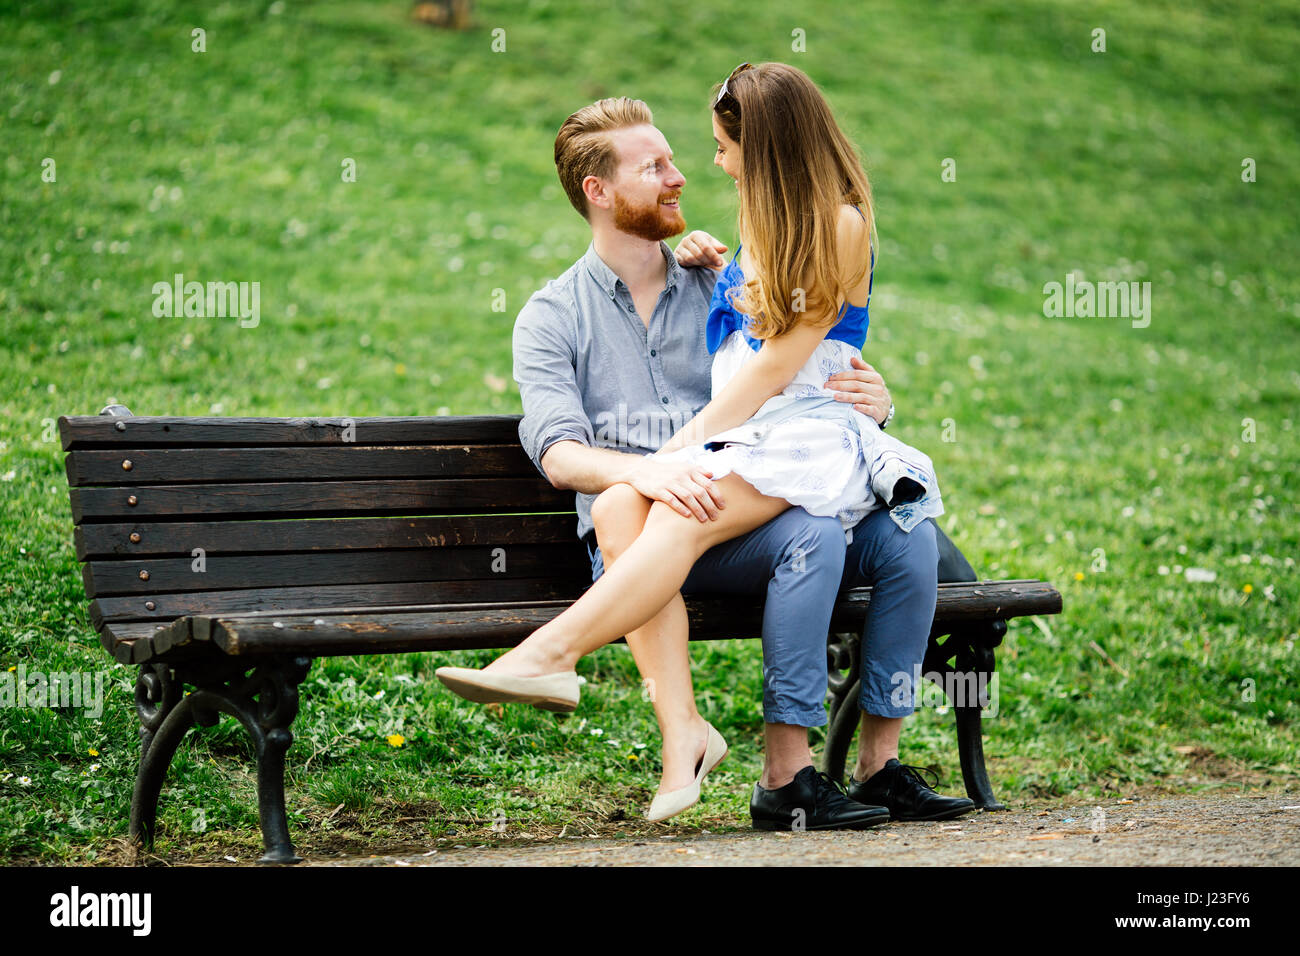 Romantic couple in love sitting on park bench Stock Photo - Alamy